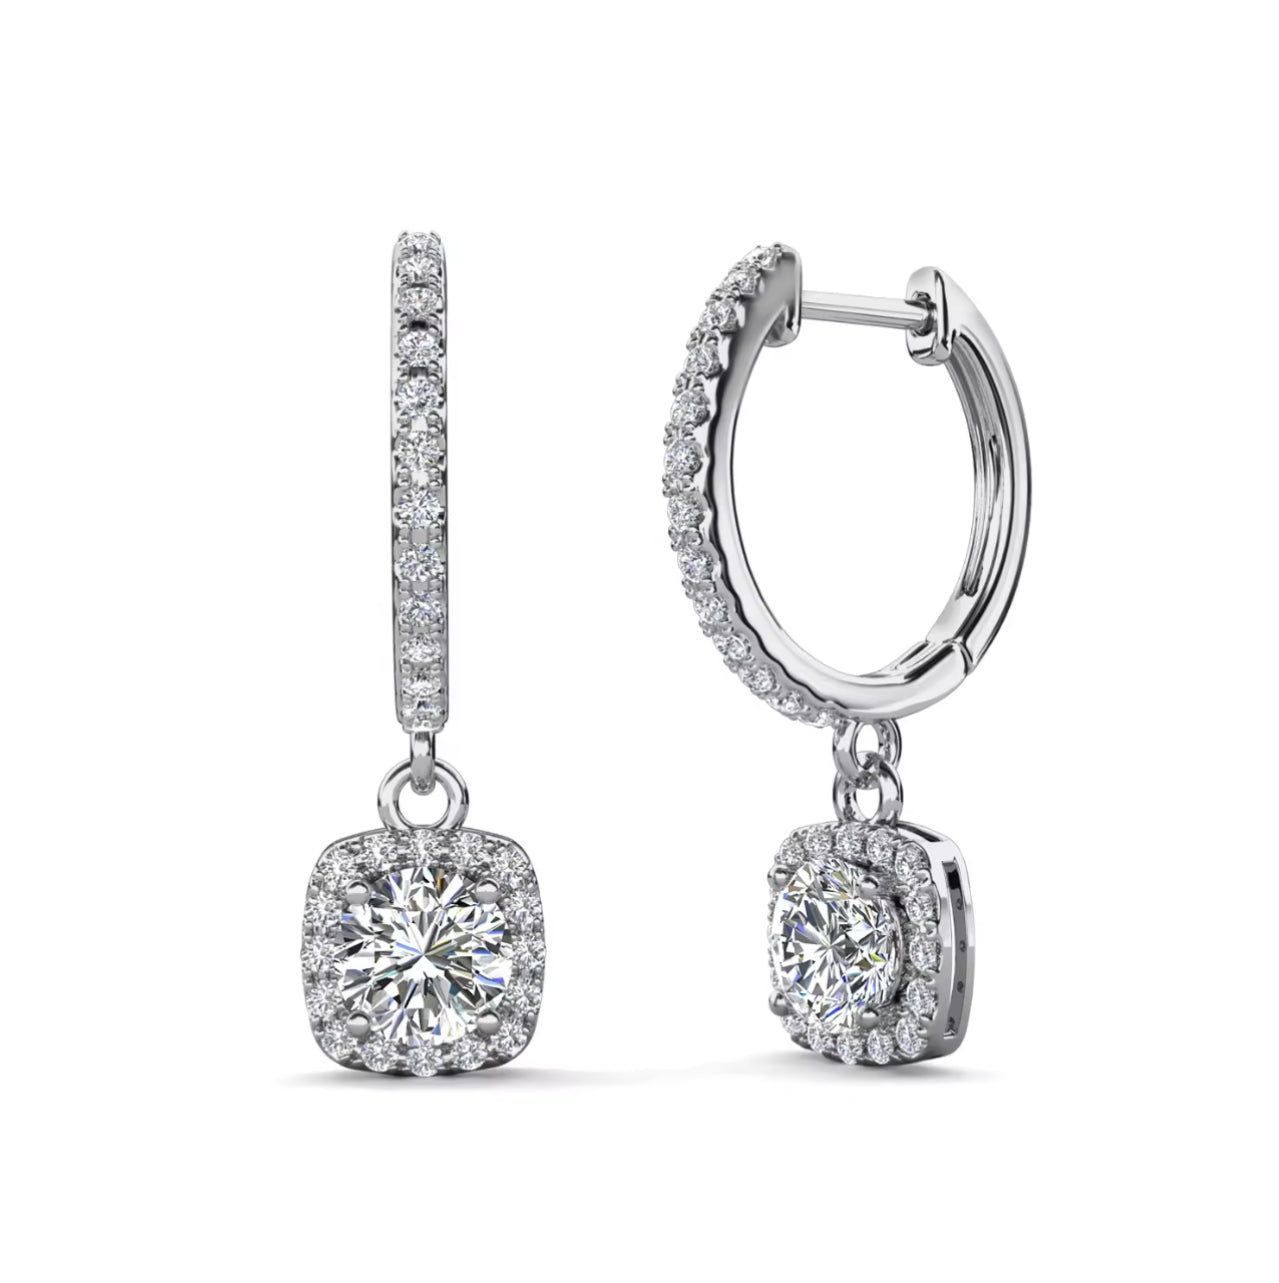 Moissanite square earrings in a variety of colors